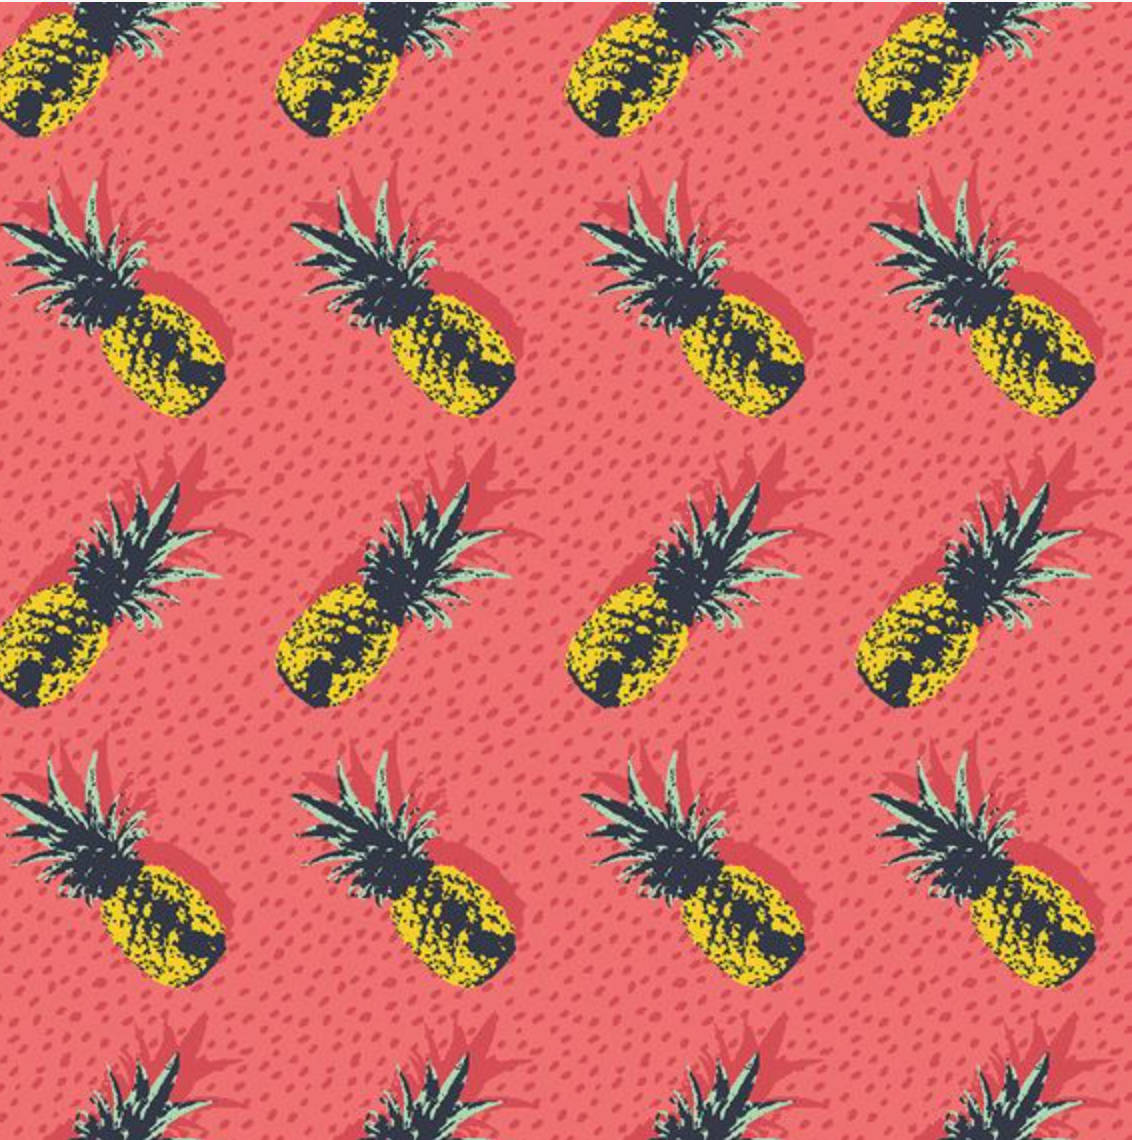 Showerwall Acrylic Prints & Images Collection - Pineapple